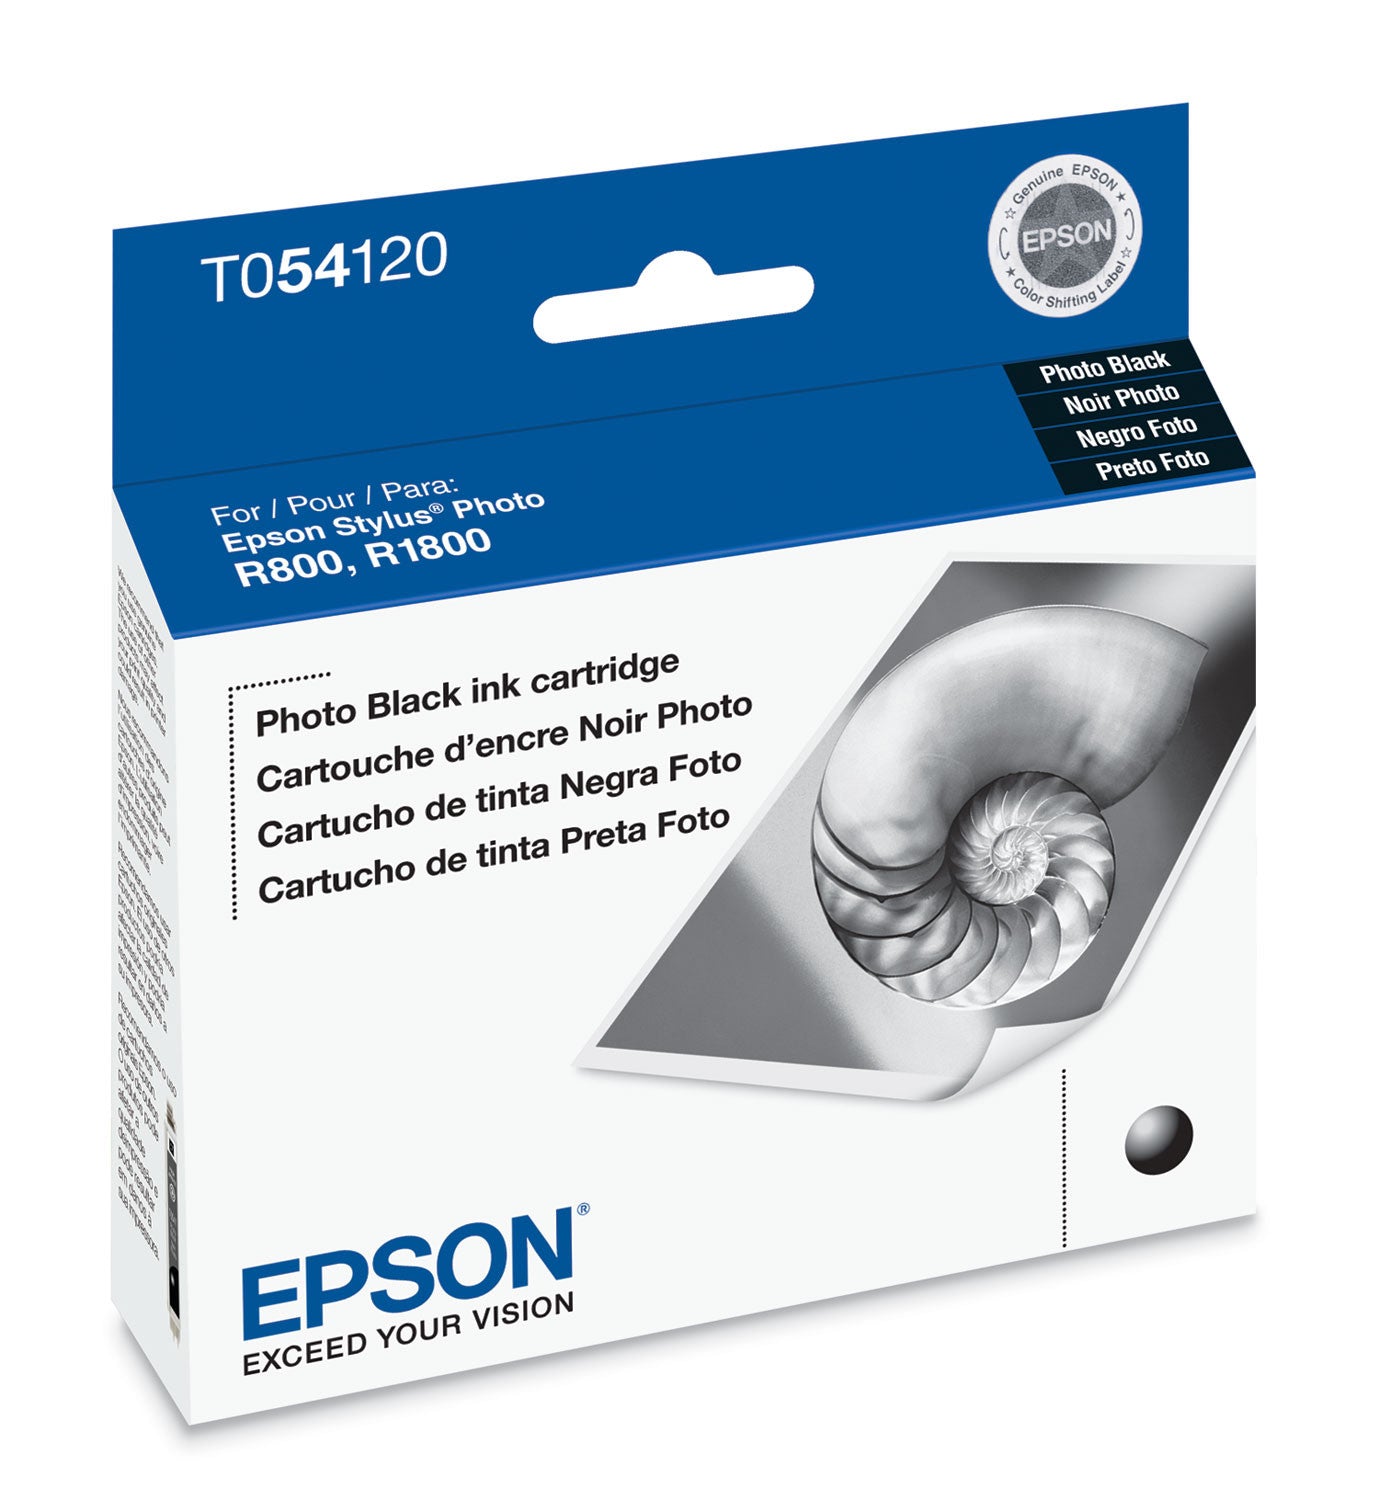 Epson T054120 R800/R1800 Photo Black Ink, printers ink small format, Epson - Pictureline  - 1